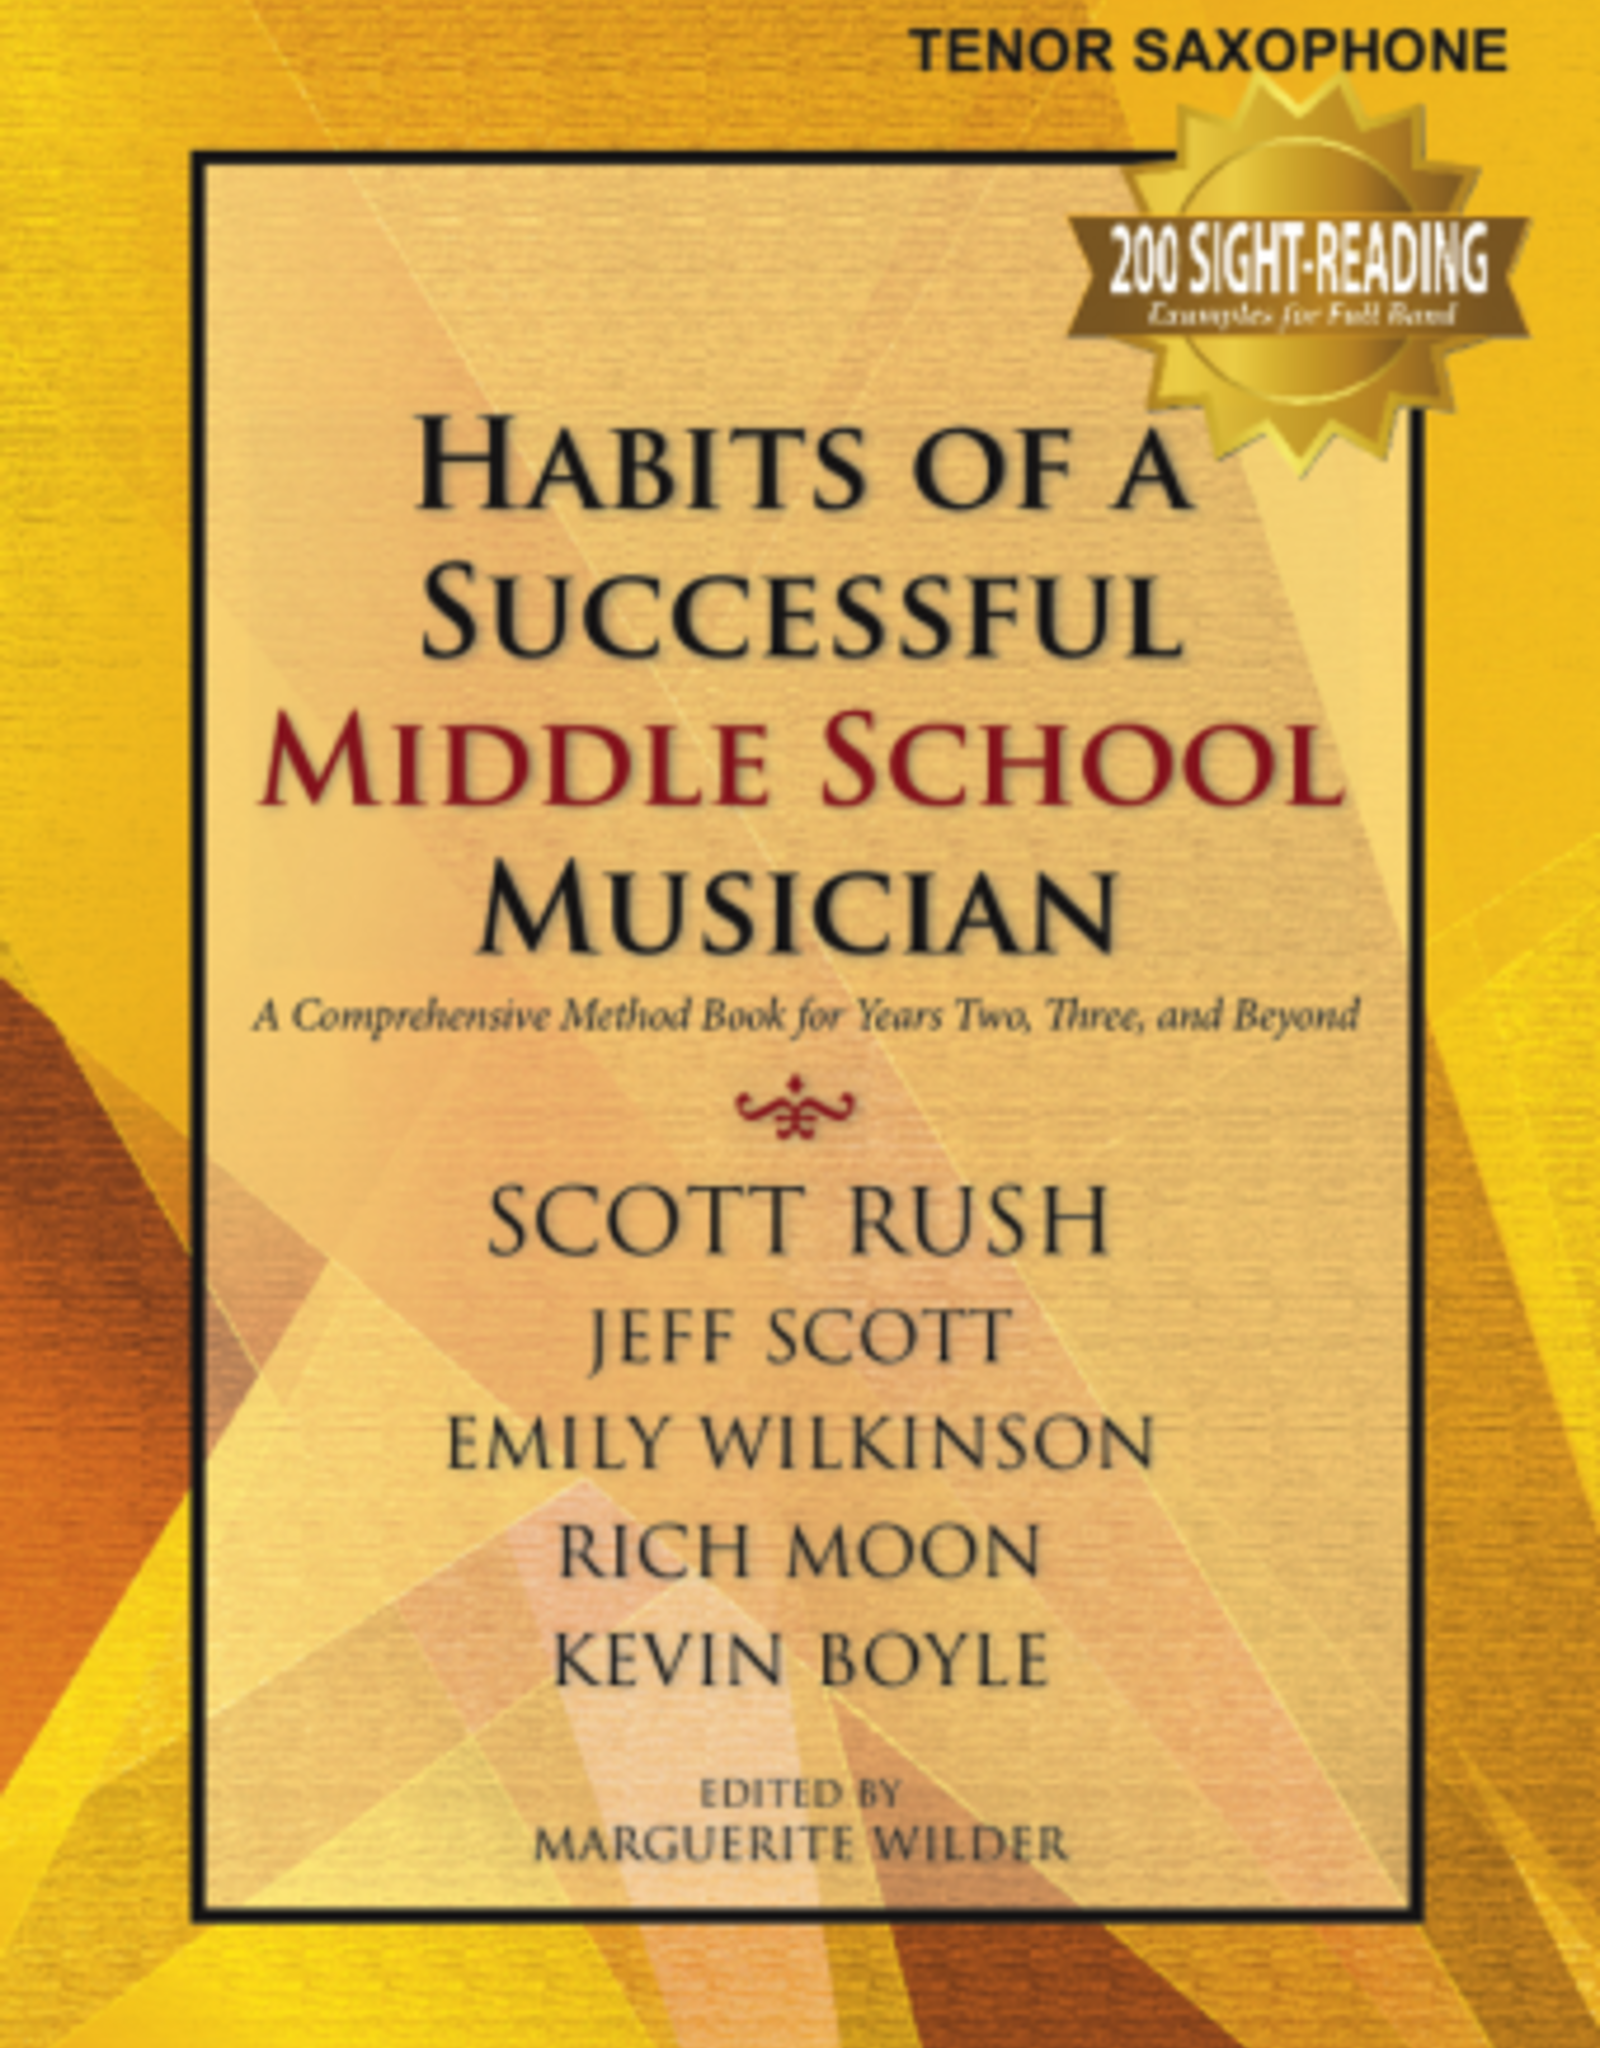 GIA Publications Habits of a Successful Middle School Musician-Tenor Saxophone